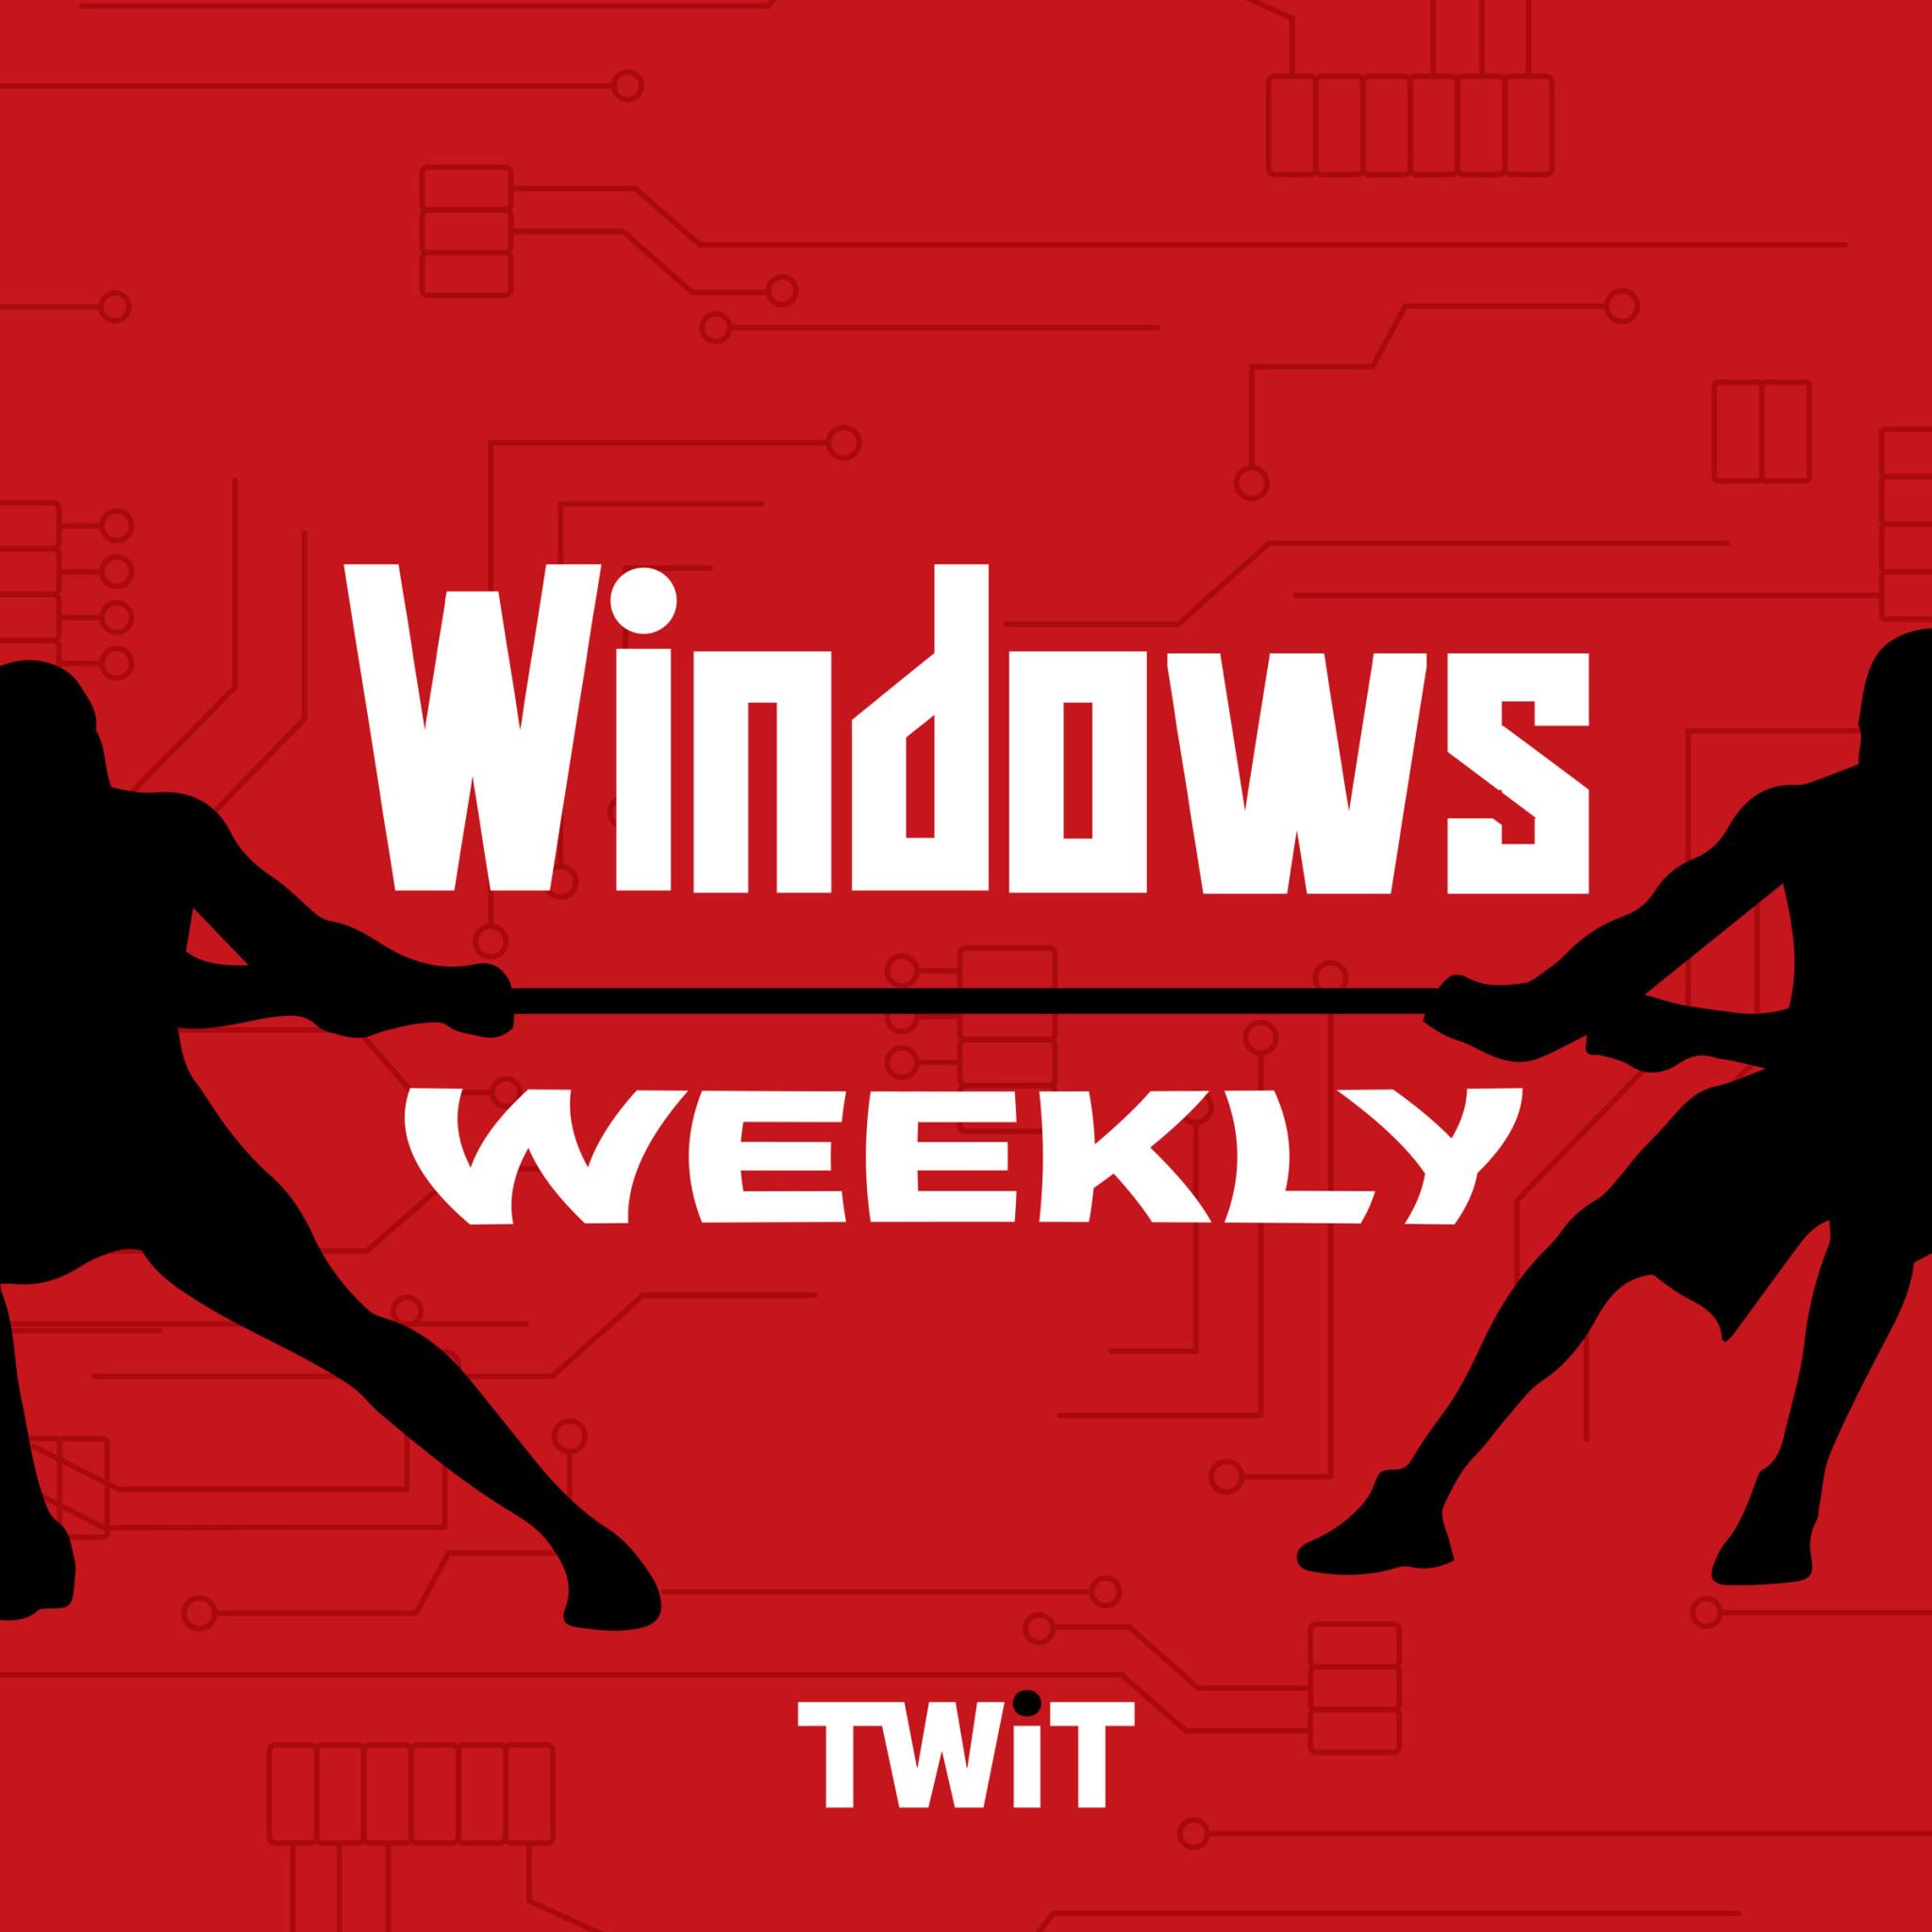 WW 848: The Era of a Grinning Paul - Microsoft September Event, Meteor Lake, Windows 11 2023 Update : In this episode of Windows Weekly, Mikah Sargent is joined by Paul and Richard to discuss the latest Microsoft updates, news, and products. Paul chimes in on his experience at Microsoft’s recent AI event, changes to Windows 11’s confusing updates, last week’s Xbox leaks, antitrust lawsuits against tech companies like Microsoft and Amazon, and more! Microsoft Special Event: Blockbuster... or blockluster? Paul went to his first in-person Microsoft event in almost four years. You’re not going to believe what happened next! Ahead of the event, everyone was calling this a "Surface event" and some still are. But it was an AI event, period. Were our expectations met? Copilot "rebrand" was in many ways the biggest news Microsoft 365 Commercial arrives November 1 - And Microsoft 365 consumer is a thing Microsoft announced two Surface PCs at event, one with an NPU. And then two other Surface PCs/devices. Most of these do not matter WTF is happening with Windows 11 23H2? We had a confusing several days, the perfect end-cap to a confusing year when it comes to Windows updating. But now we have the answers. At special event, Microsoft reveals it will ship "next major Windows 11 update" September 26. It’s 23H2! It’s not 23H2! One day after the event, Release Preview gets Fall Update Paul attempted to achieve some clarity ahead of John Cable’s post Microsoft releases the Fall Update (in preview form) Is Windows 11 finally where it needed to be when Microsoft shipped v1 two years ago? Follow-ups to last week’s blockbuster news� Panos Panay will succeed Dave Limp at Amazon Further examination of the leaked Xbox documents Microsoft’s reaction to the PS5 specs reveal is sort of clueless in retrospect Microsoft wanted to buy Nintendo. No, really. And it considered lots of companies Antitrust UK CMA provisionally approves of Microsoft’s acquis